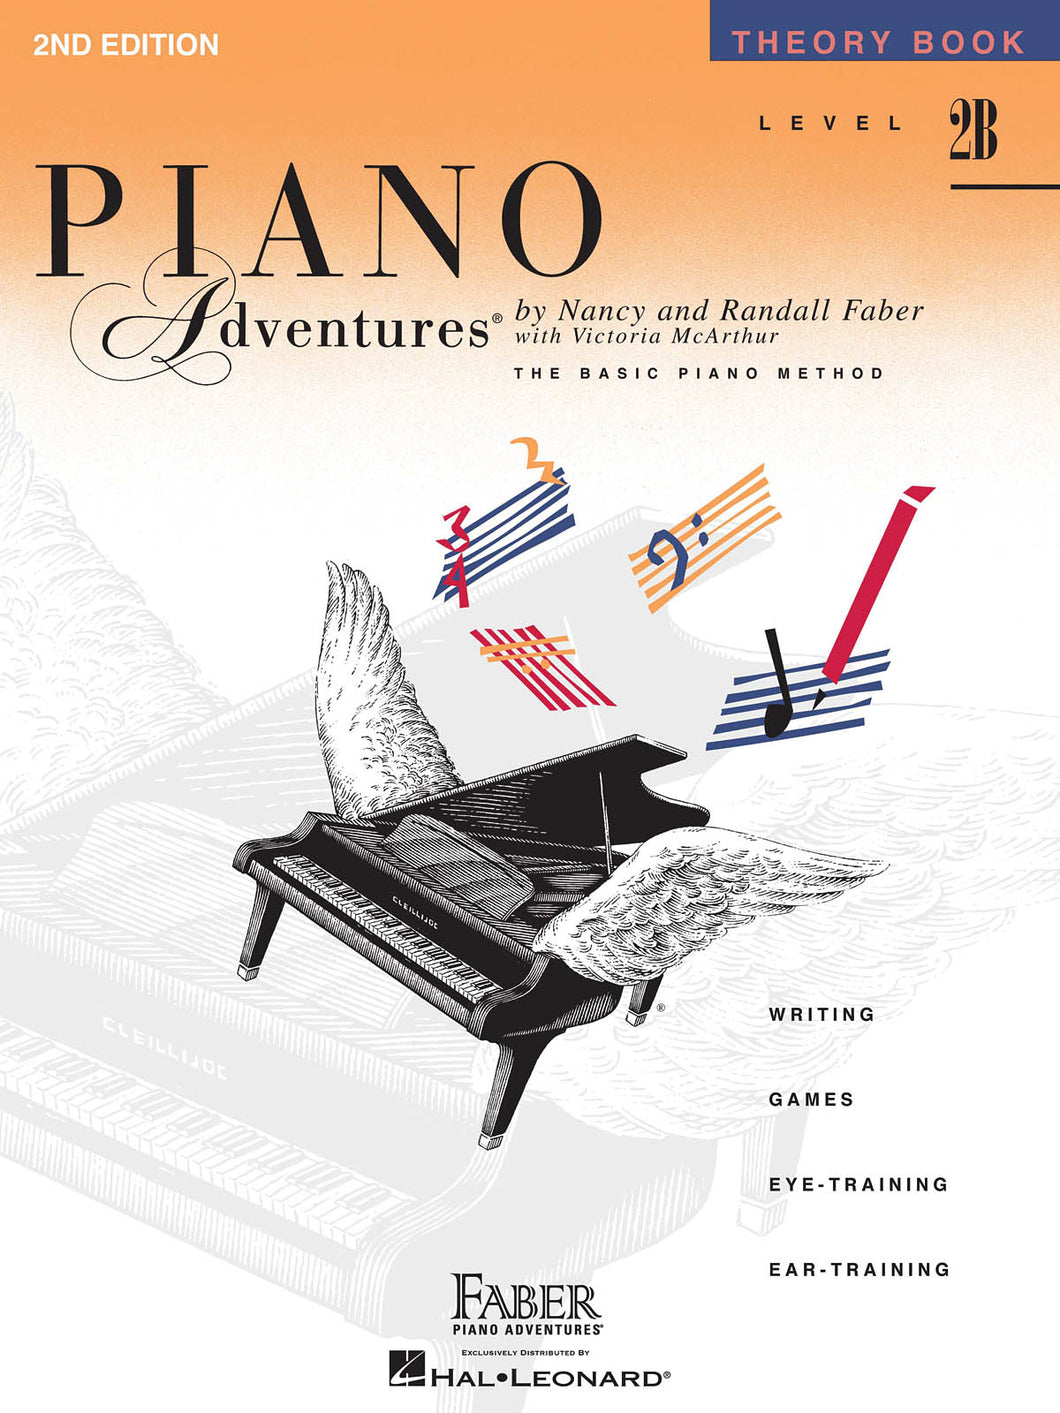 Faber Piano Adventures Theory Level 2B